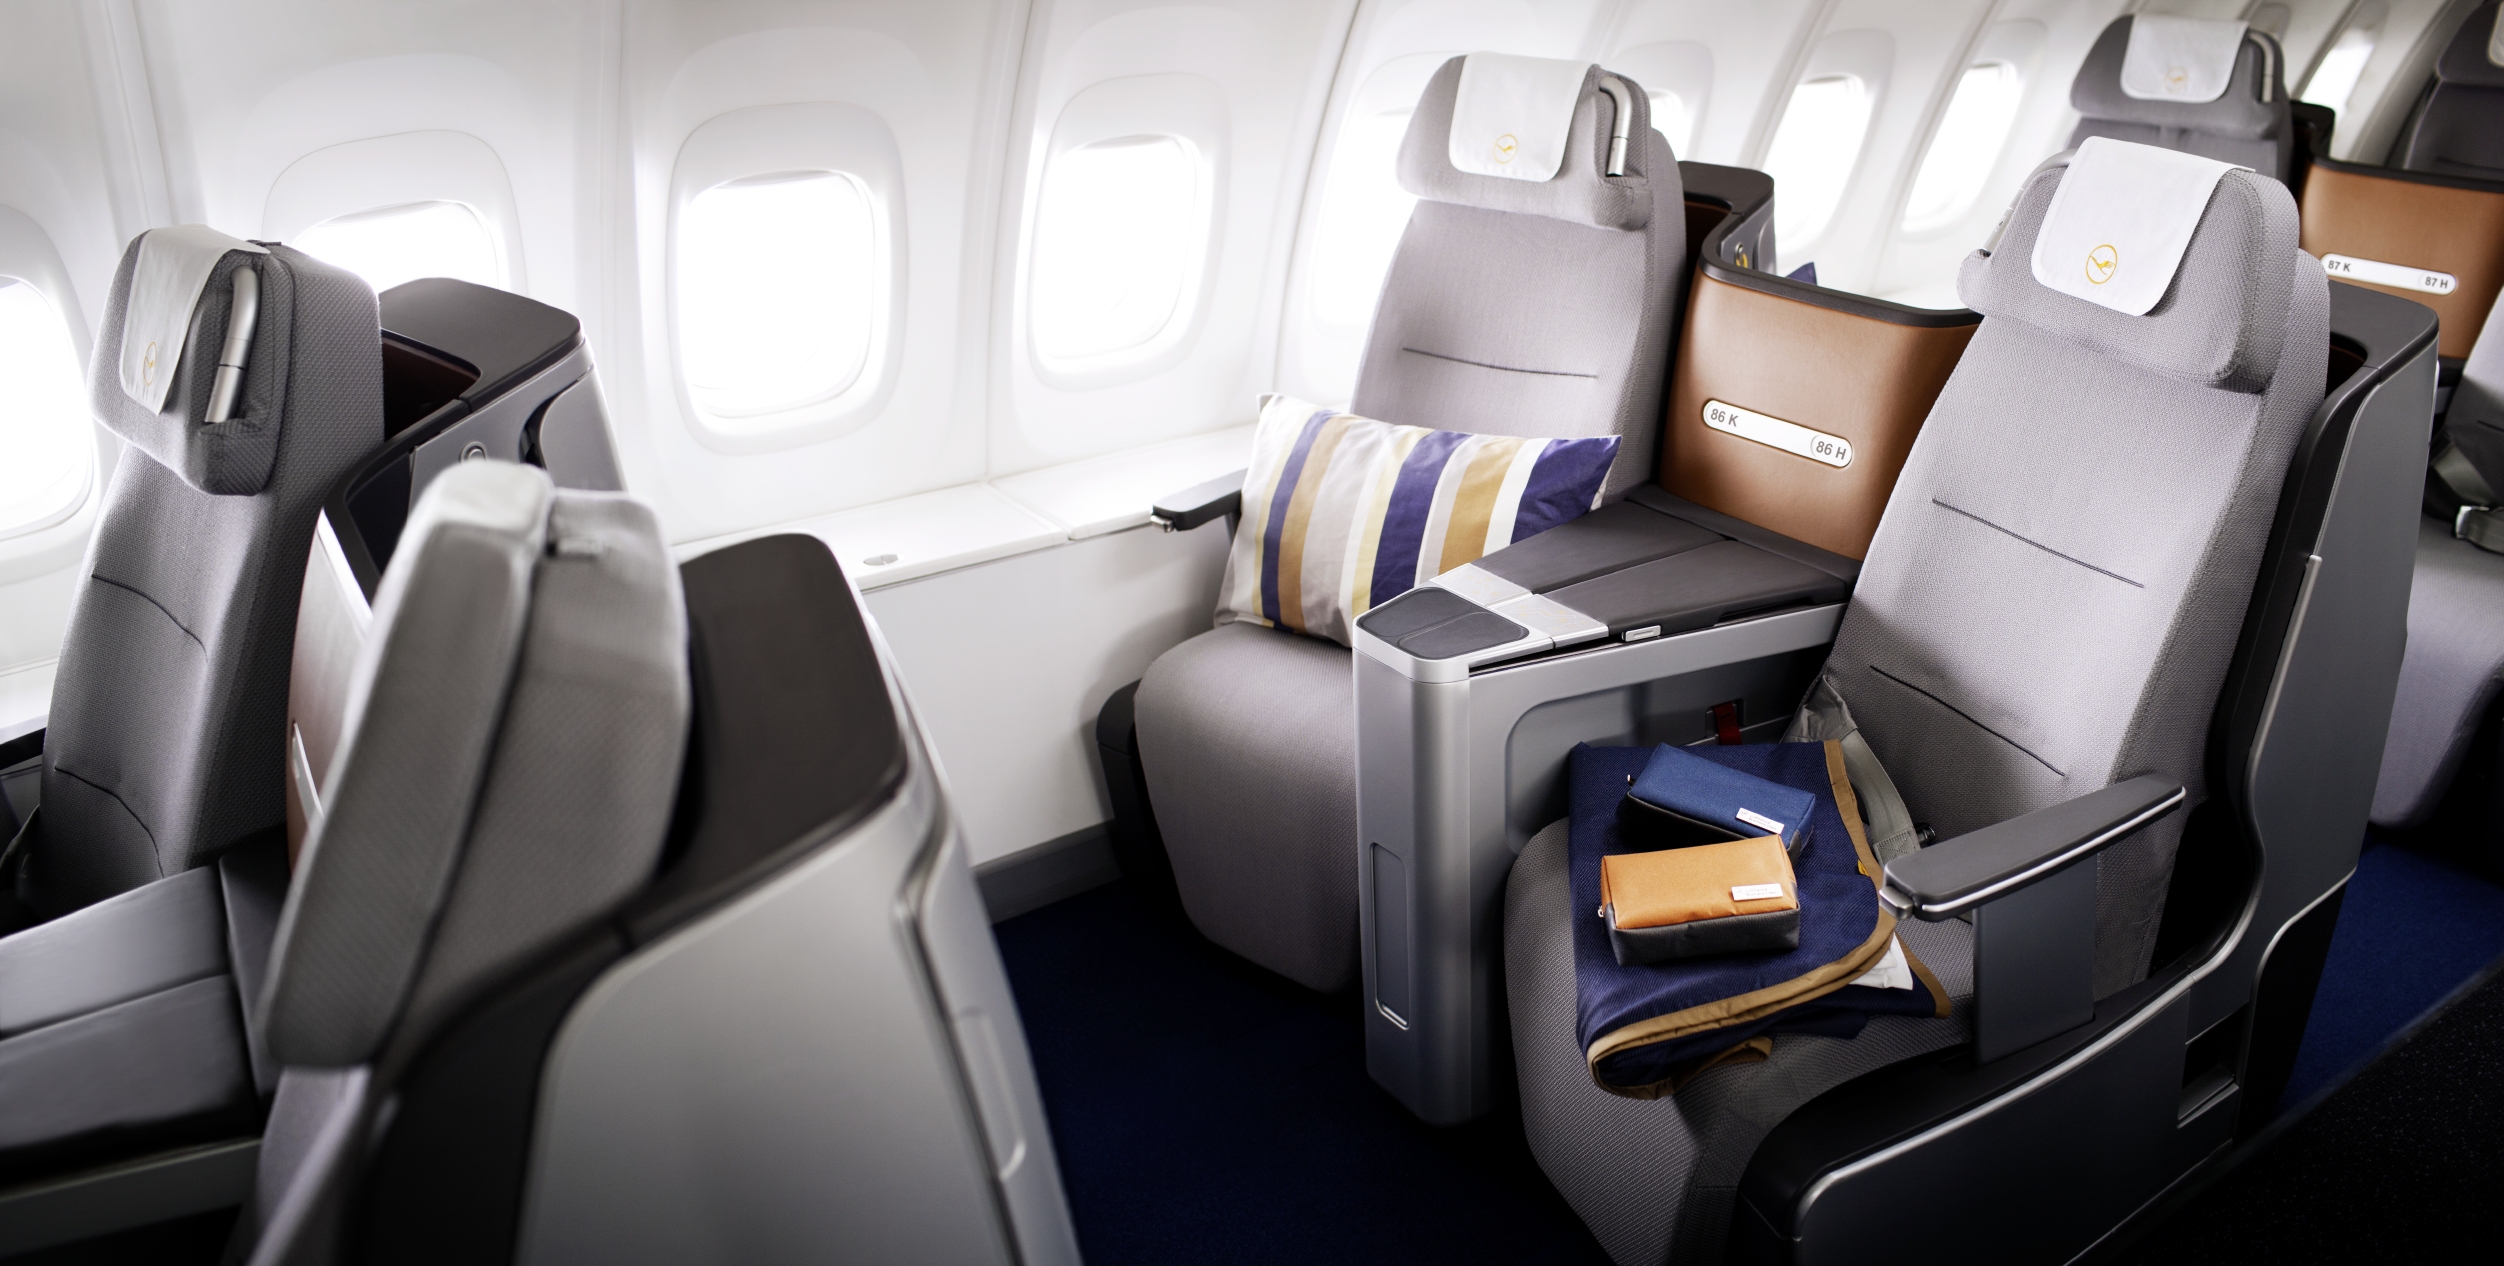 Lufthansa's new Business Class seat on the Boeing 747-8I. Click for larger. Photo from Lufthansa.